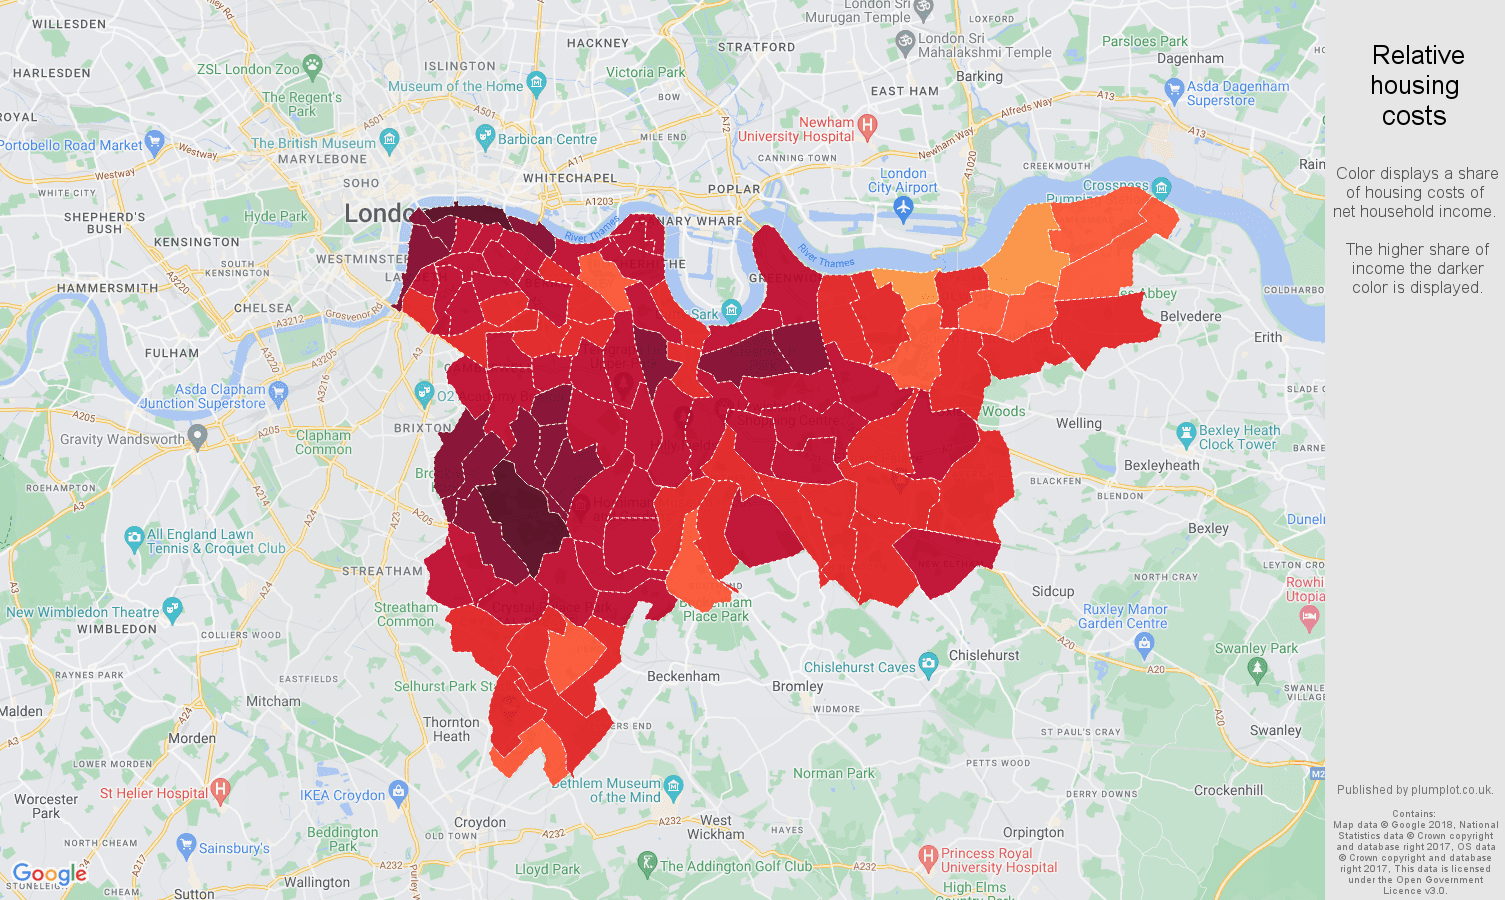 South East London relative housing costs map